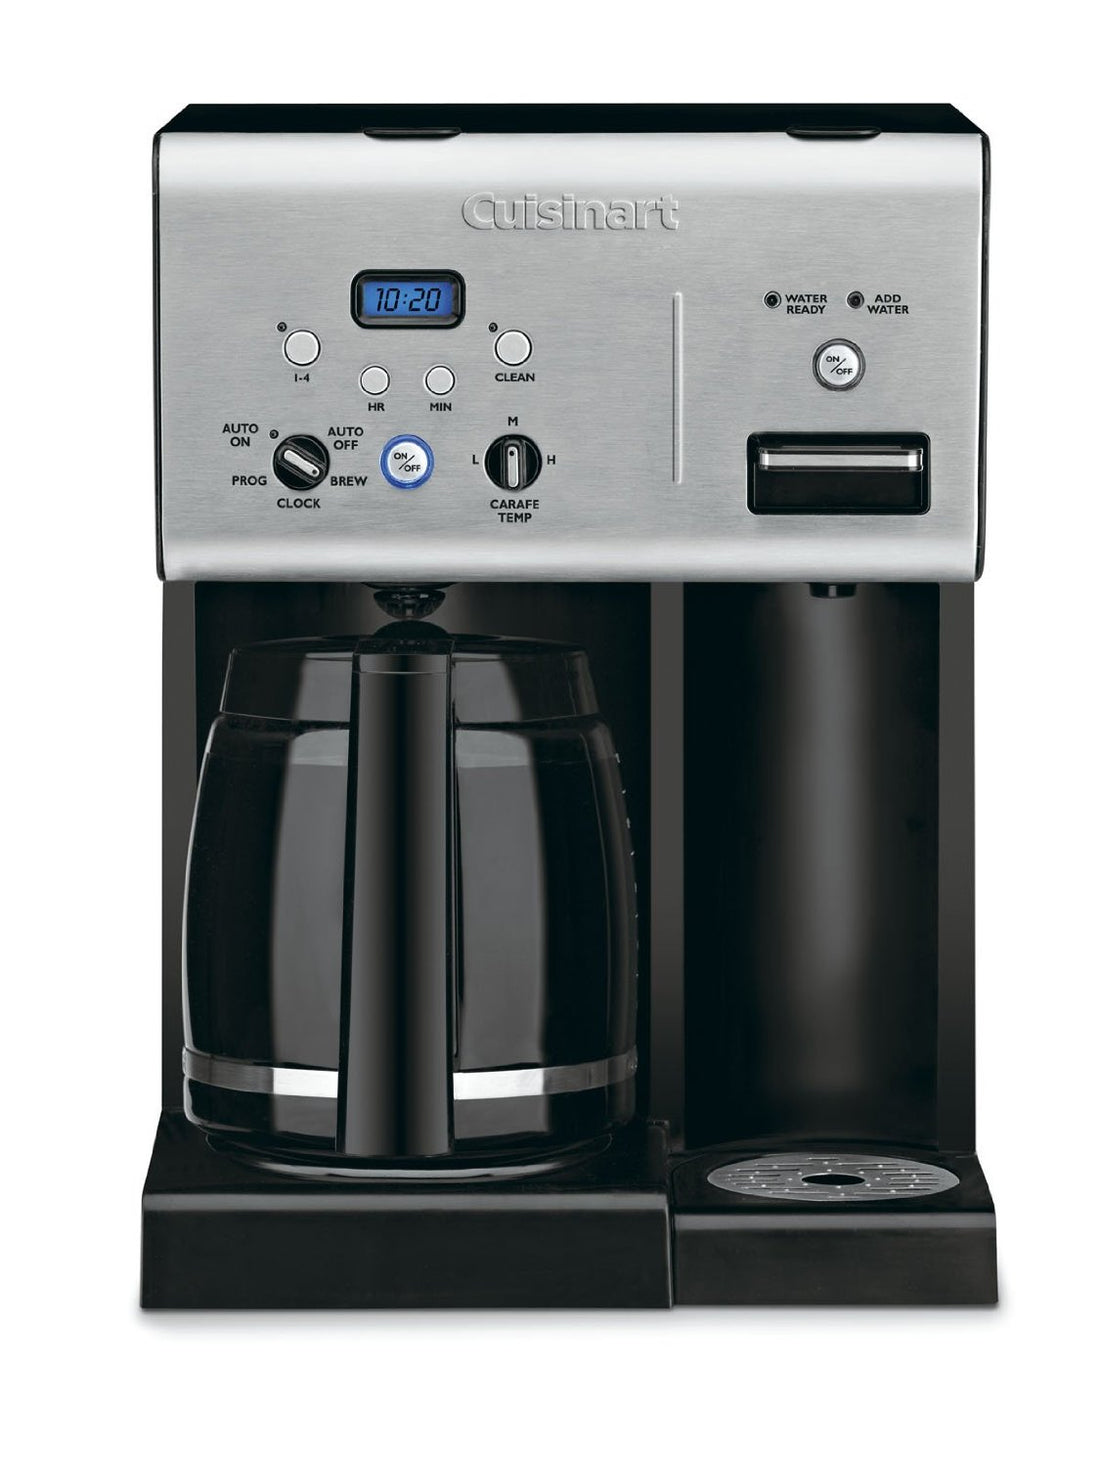 Road Pro 12 Volt Coffee Maker With Glass Carafe